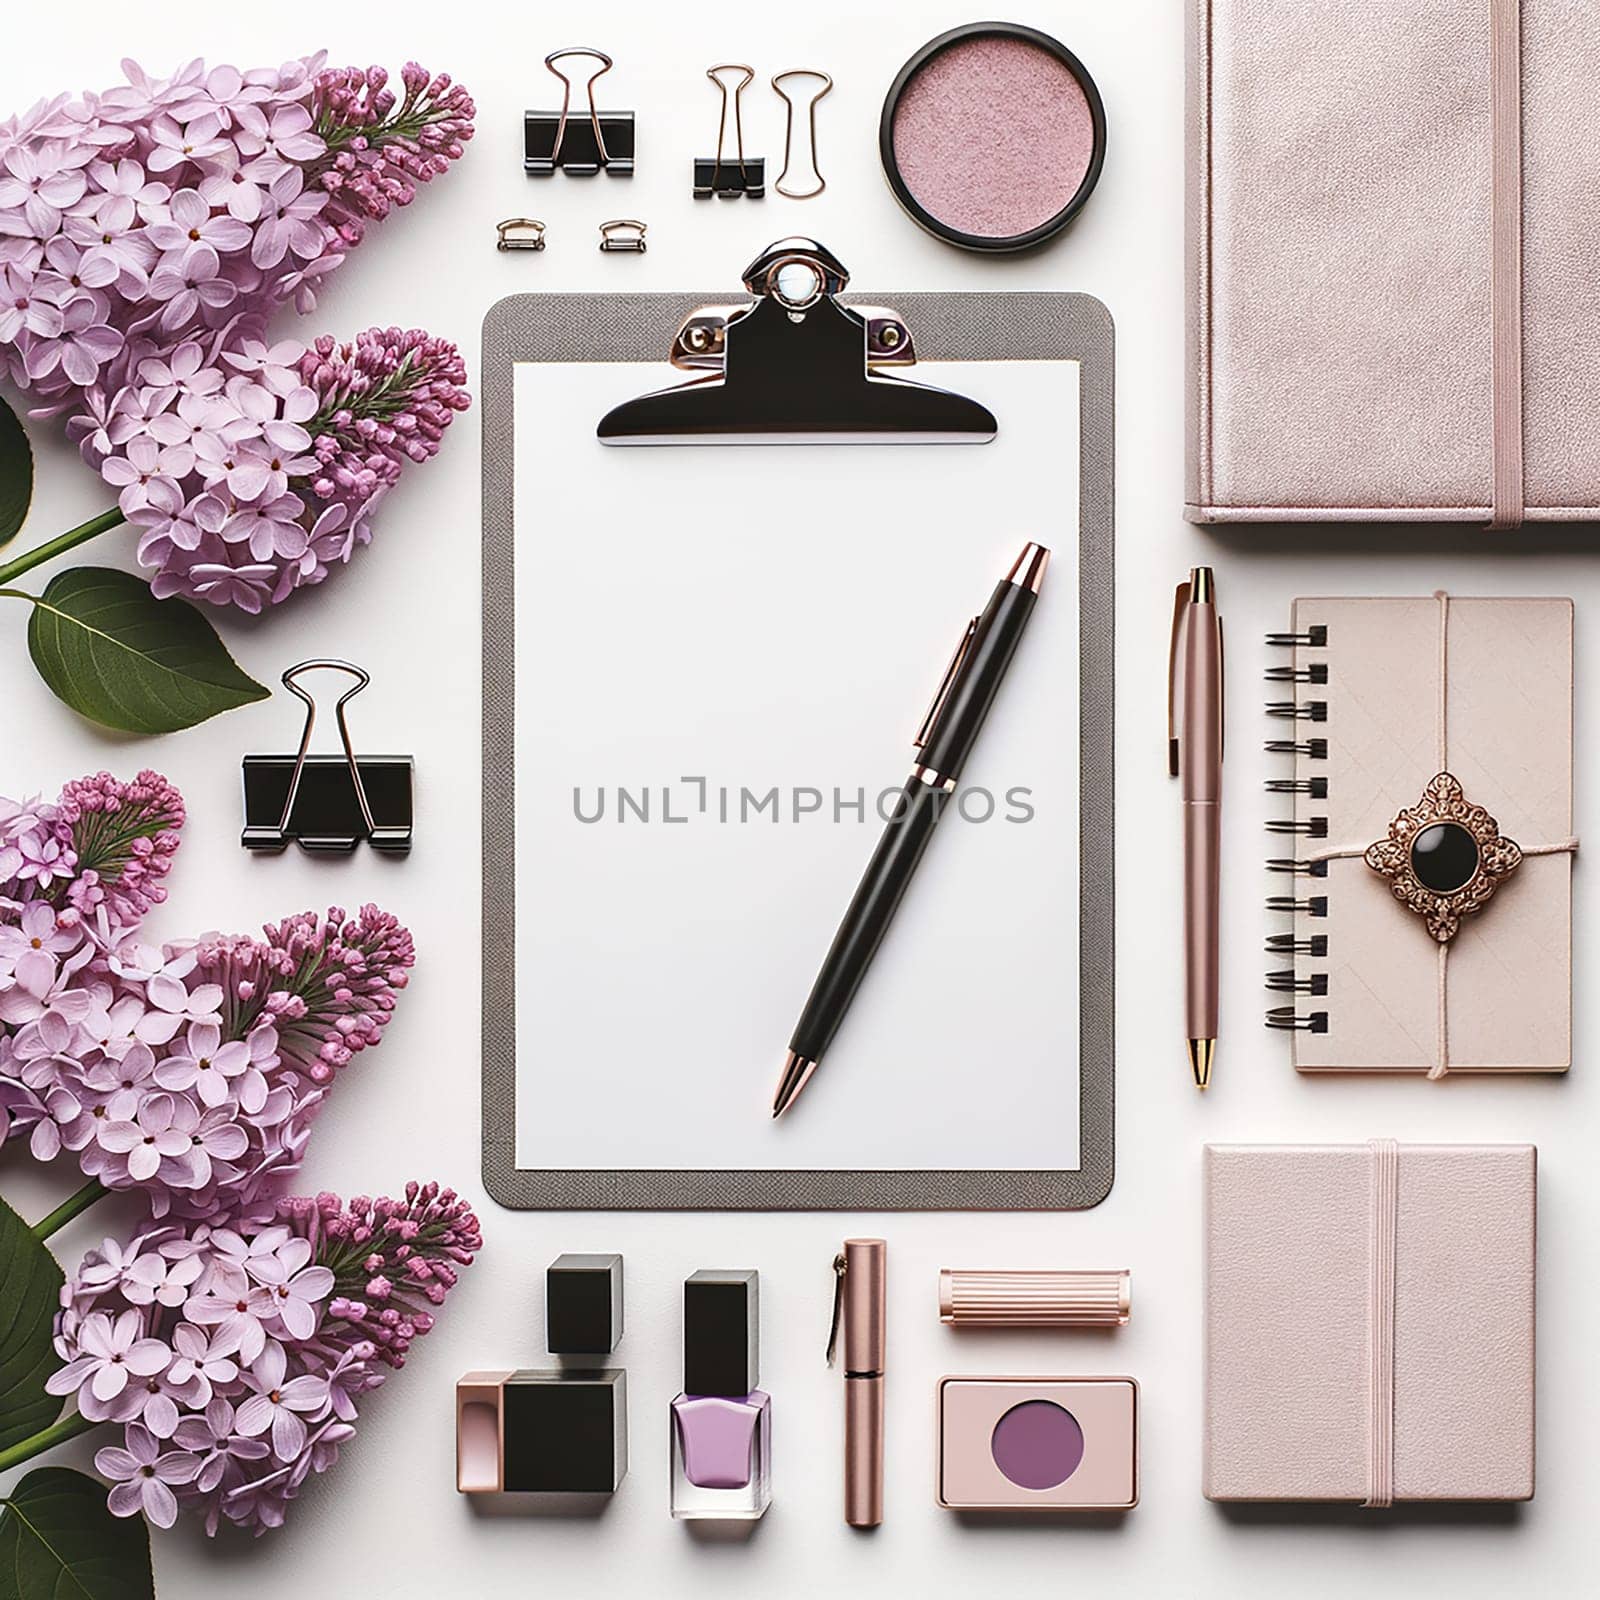 Clean and Tidy: Organized Workspace with Lilac Touches by Petrichor